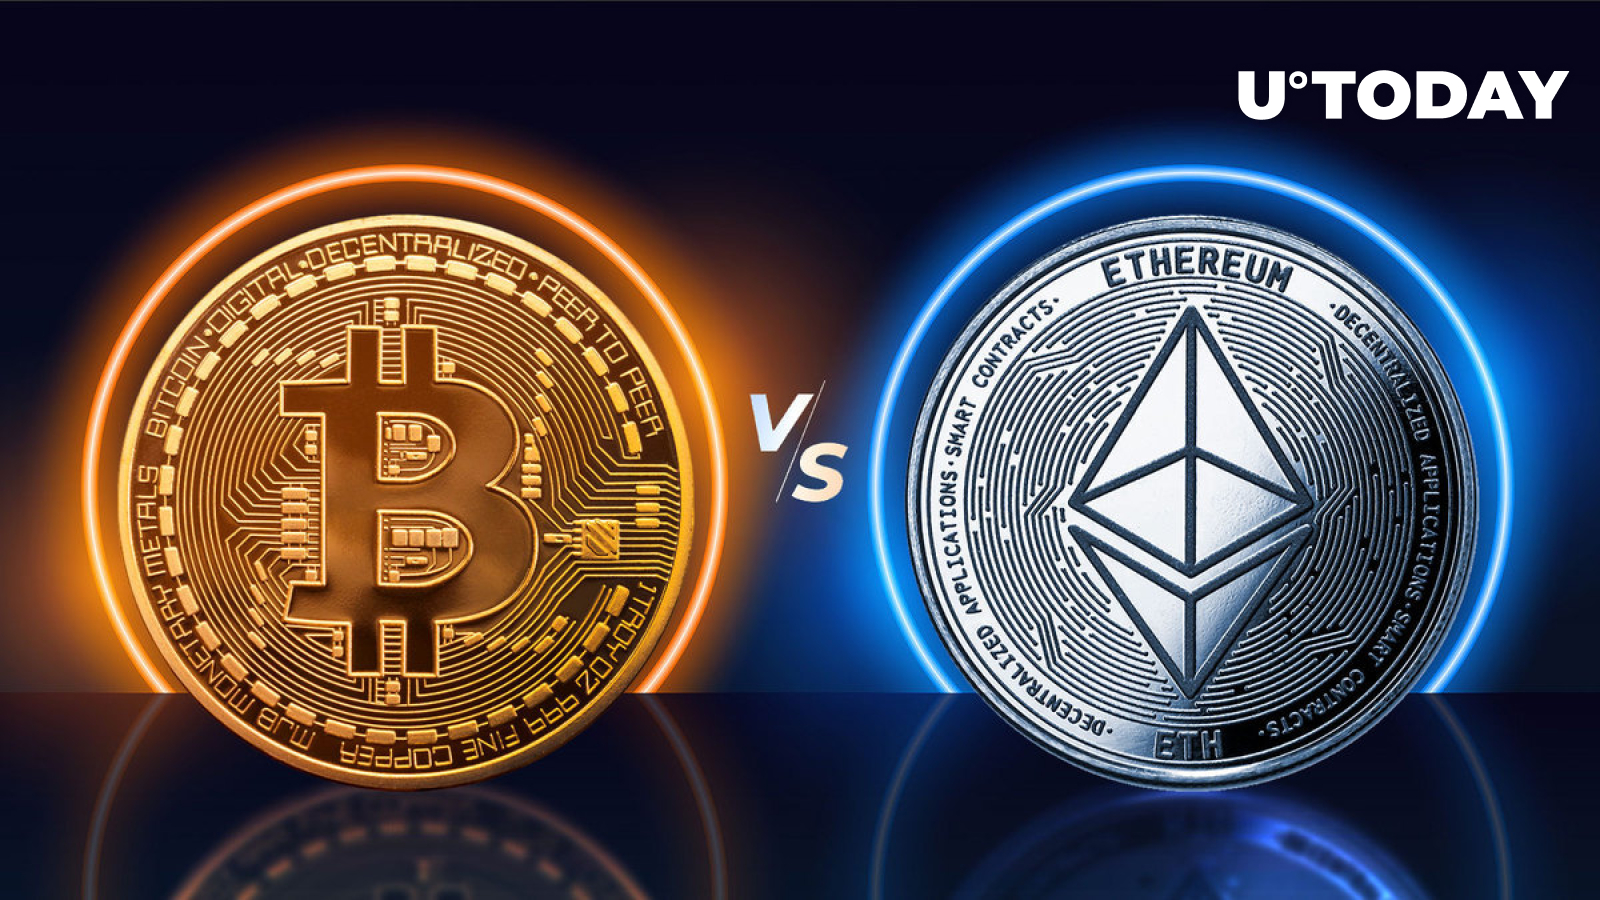 Ethereum (ETH) Crushing Bitcoin (BTC) with 6% Price Spike